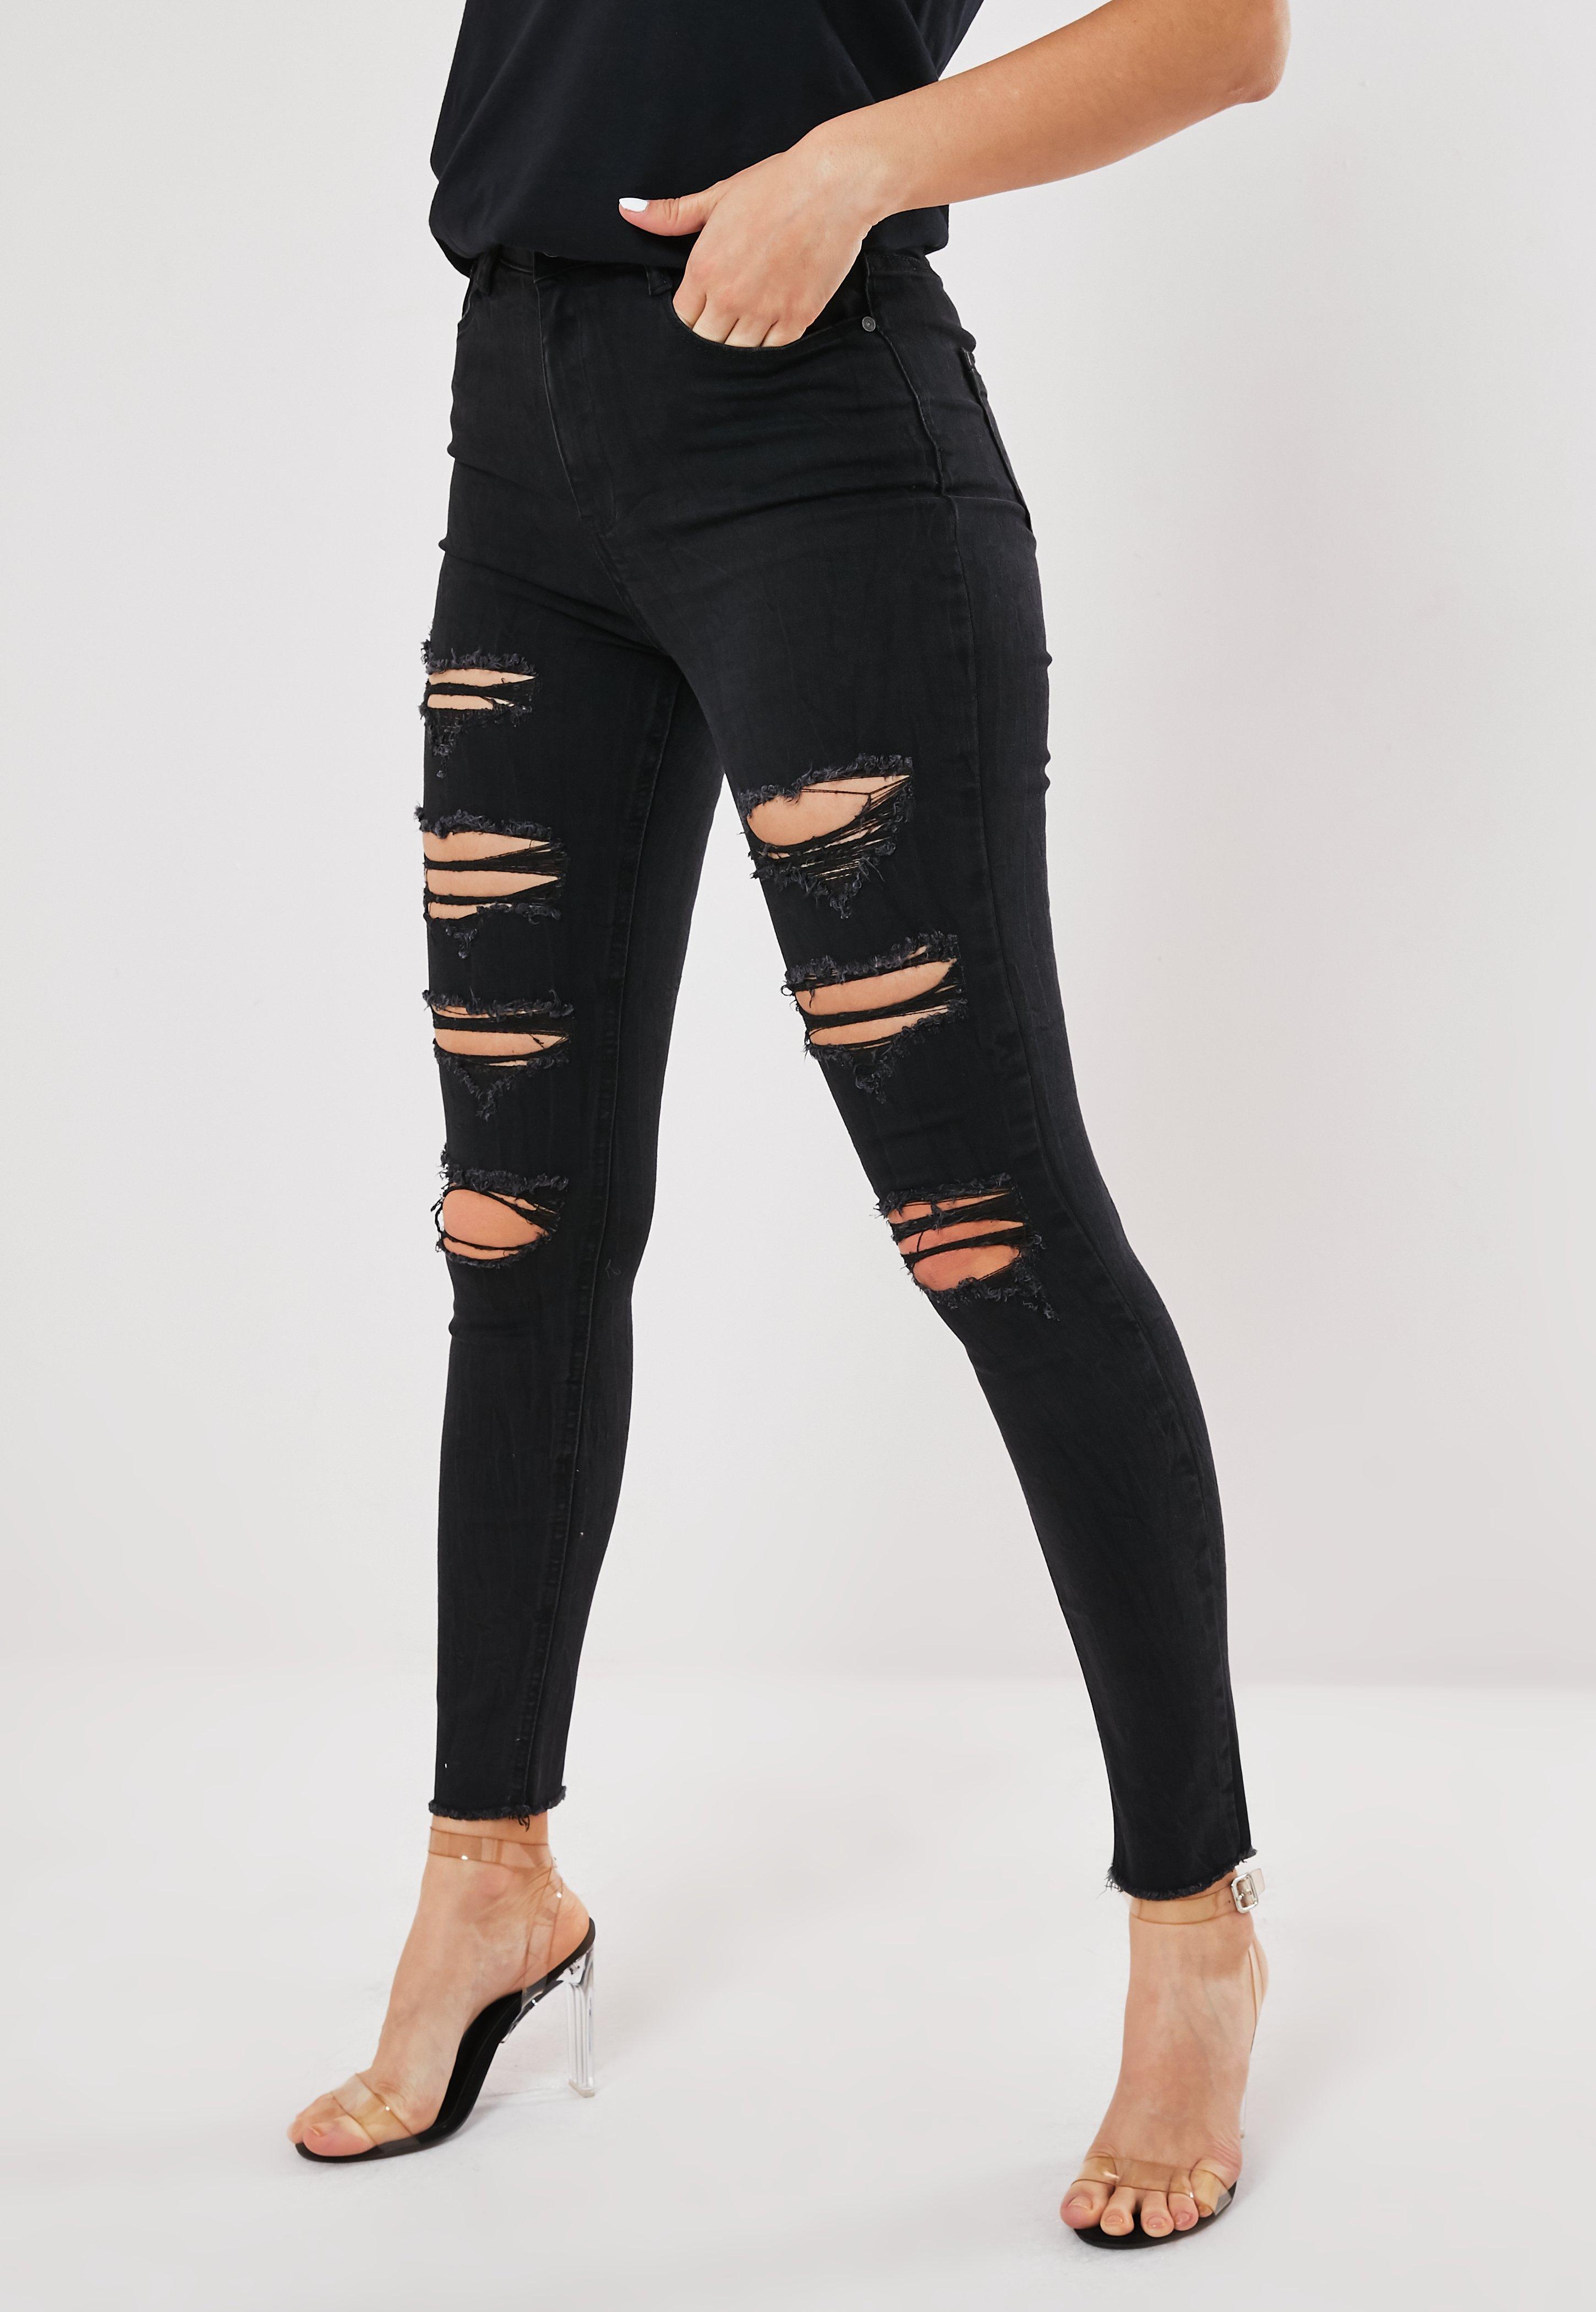 Missguided Denim Black High Waisted Extreme Ripped Skinny Jeans - Save